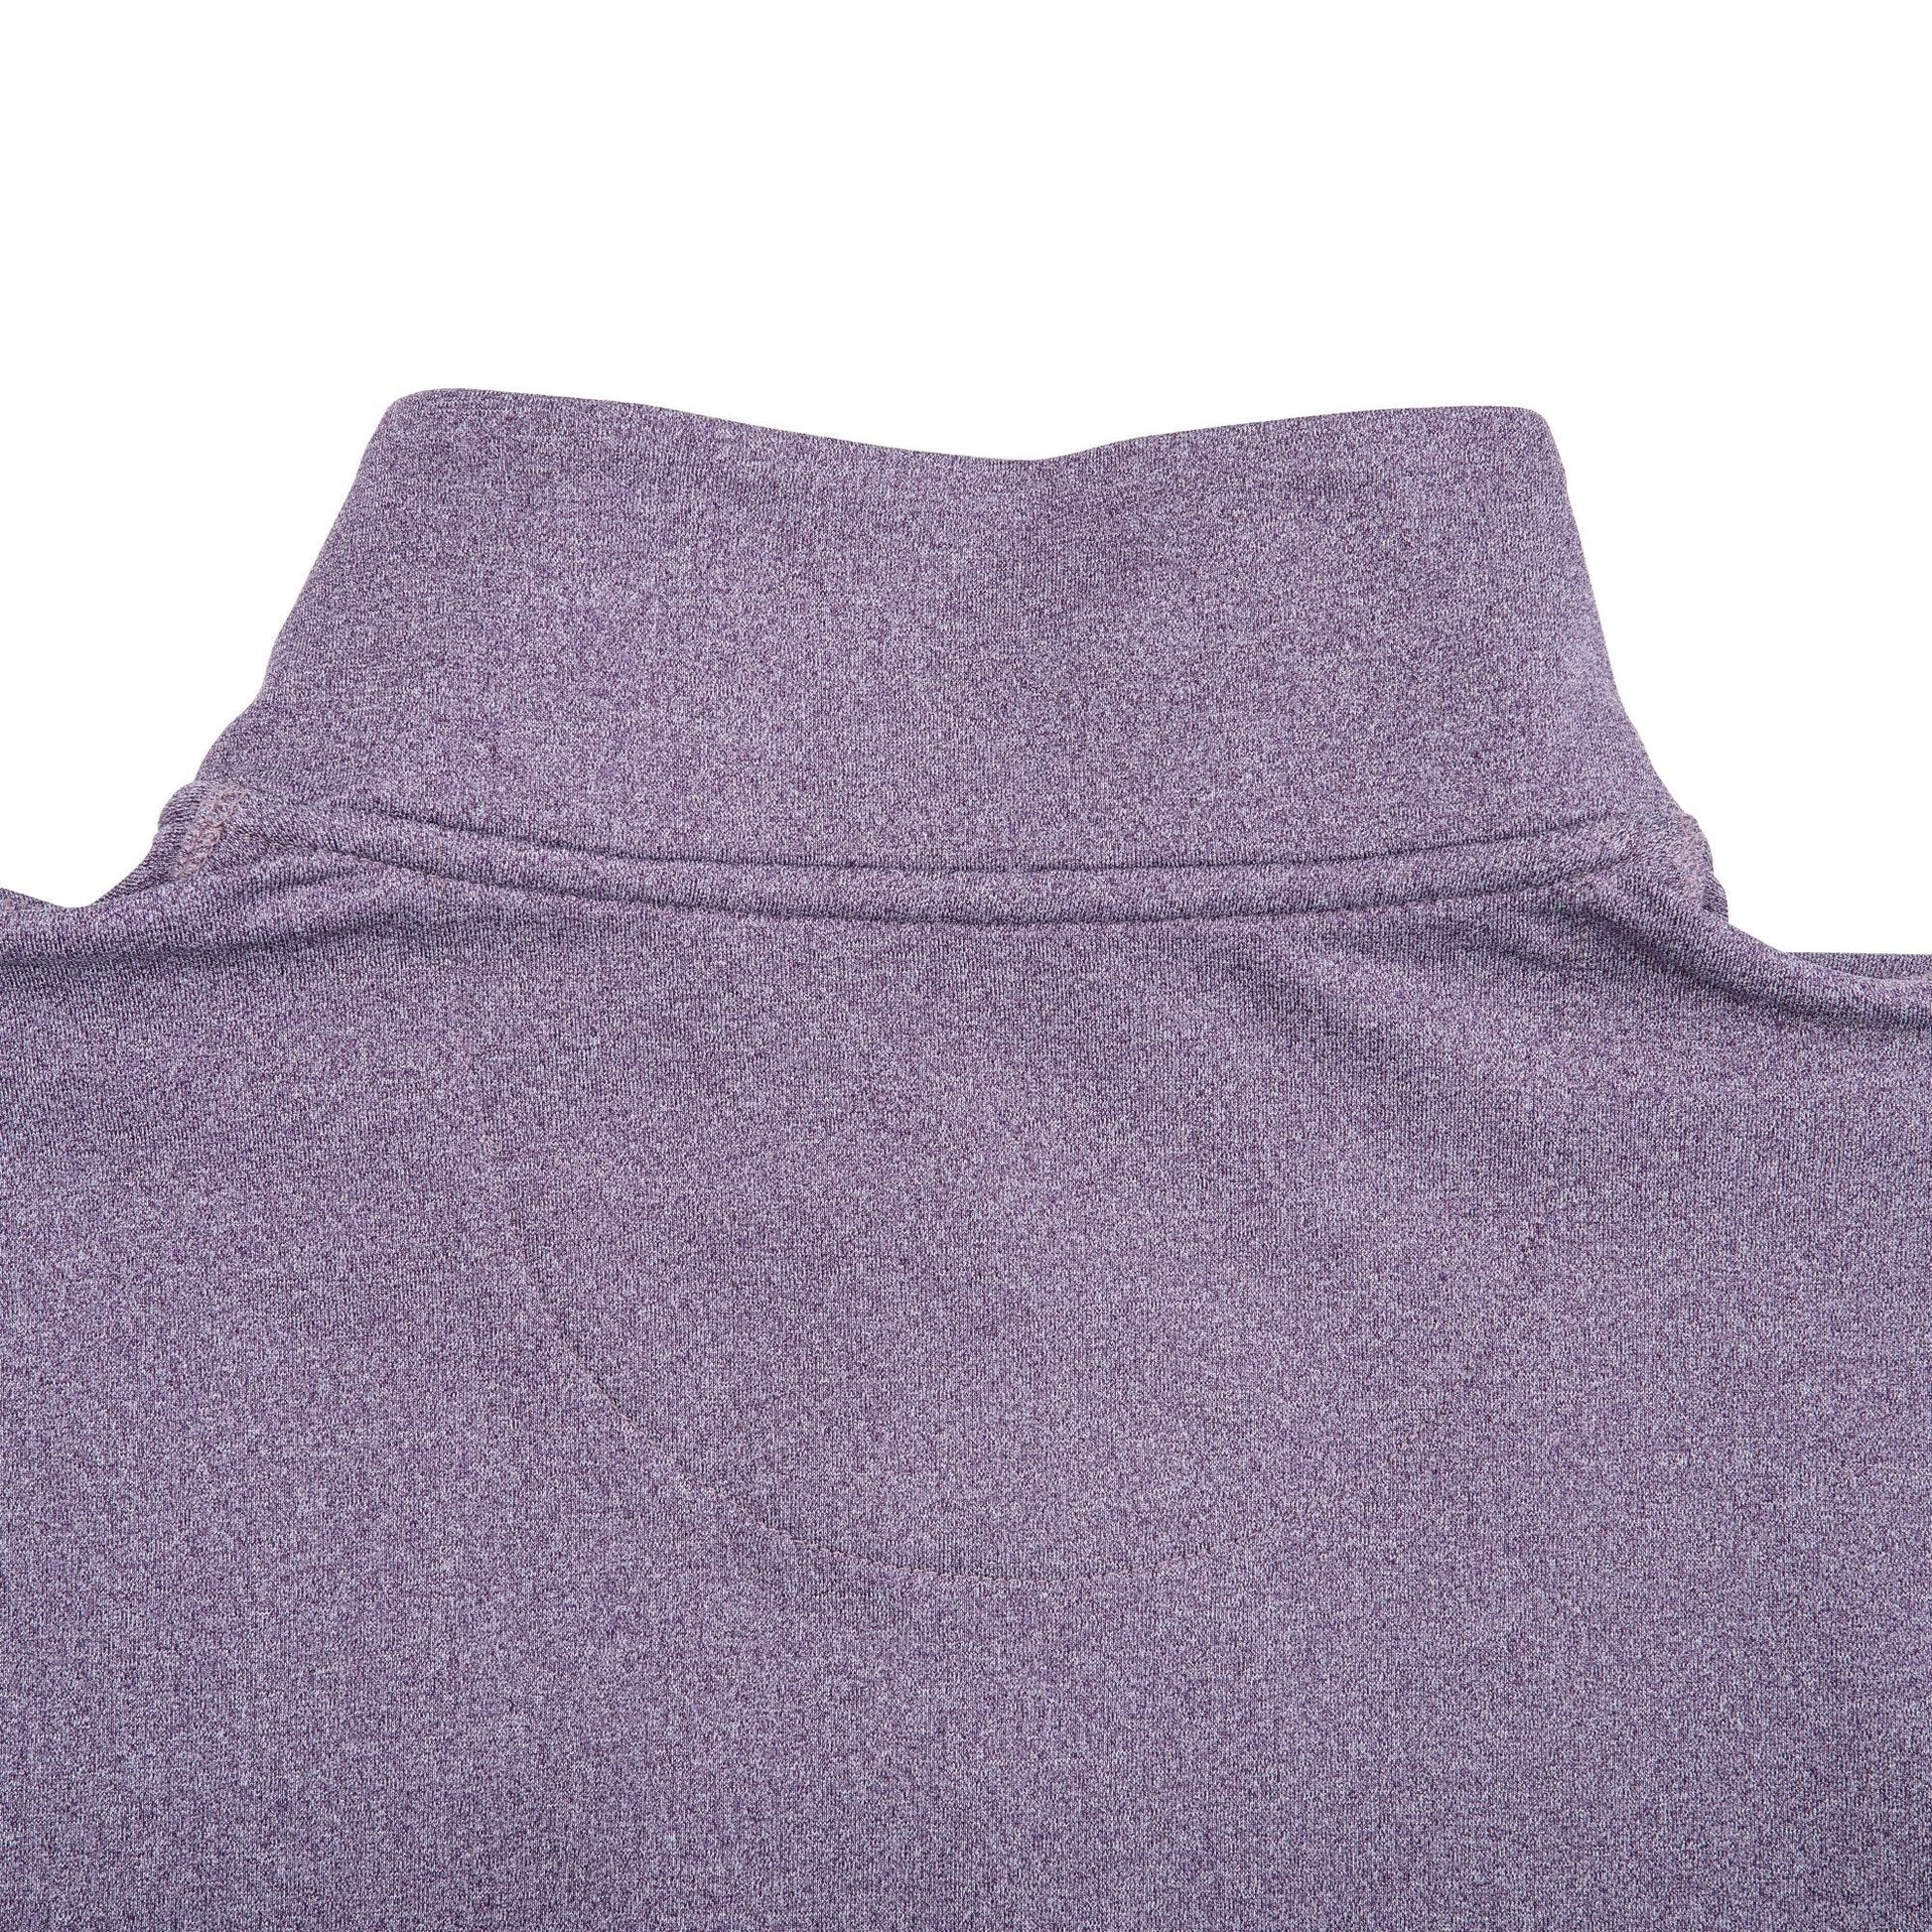 XERSION performance 1/4 zip pullover